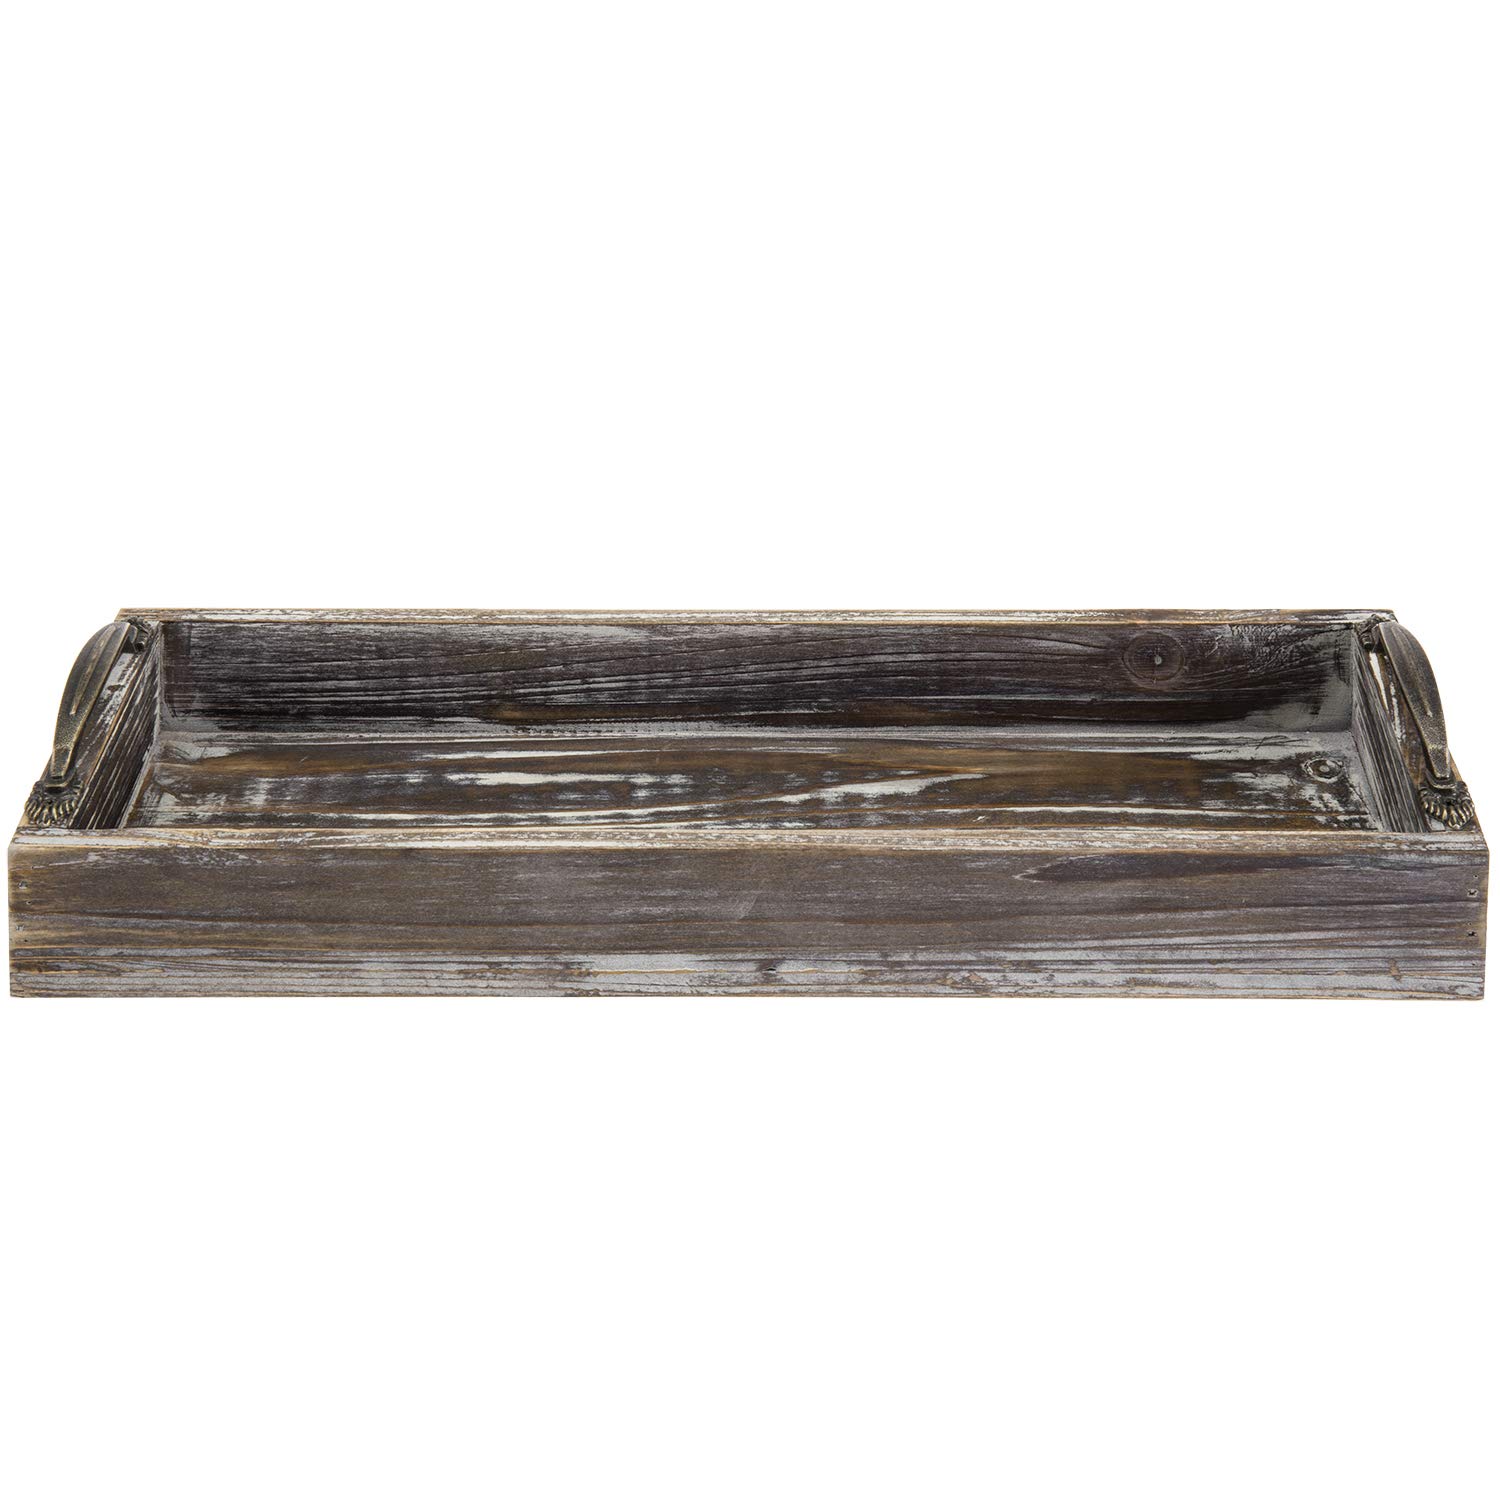 MyGift 16-inch Torched Wood Serving Tray with Decorative Antique Metal Handles | Farmhouse Decor Rectangular Butler Tray | Coffee Table/Dining Table Centerpiece Candle Holder Tray